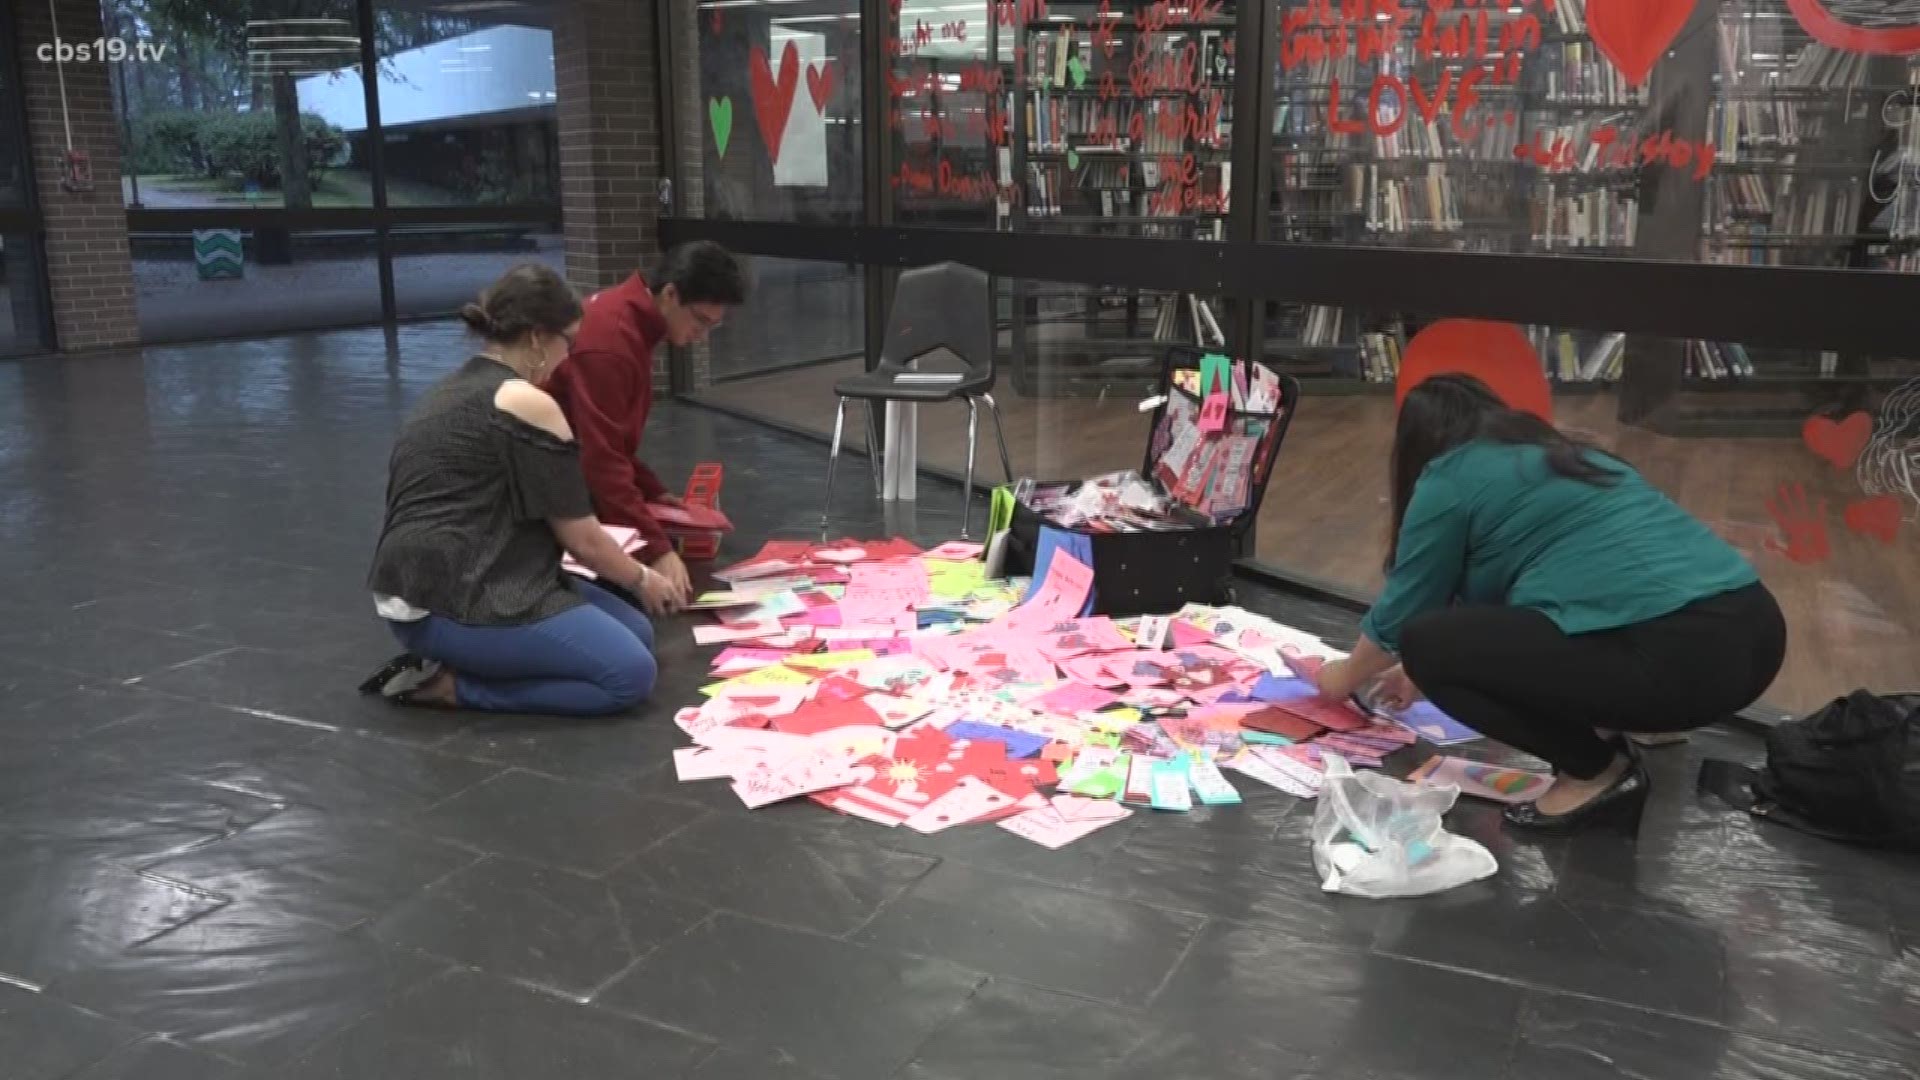 A Longview High School Student and his family  started the Cupid Project in 2018 for Valentines Day. Its goal is to spread love one greeting card at a time. Cards are delivered to nursing homes, homeless shelters, and hospitals.